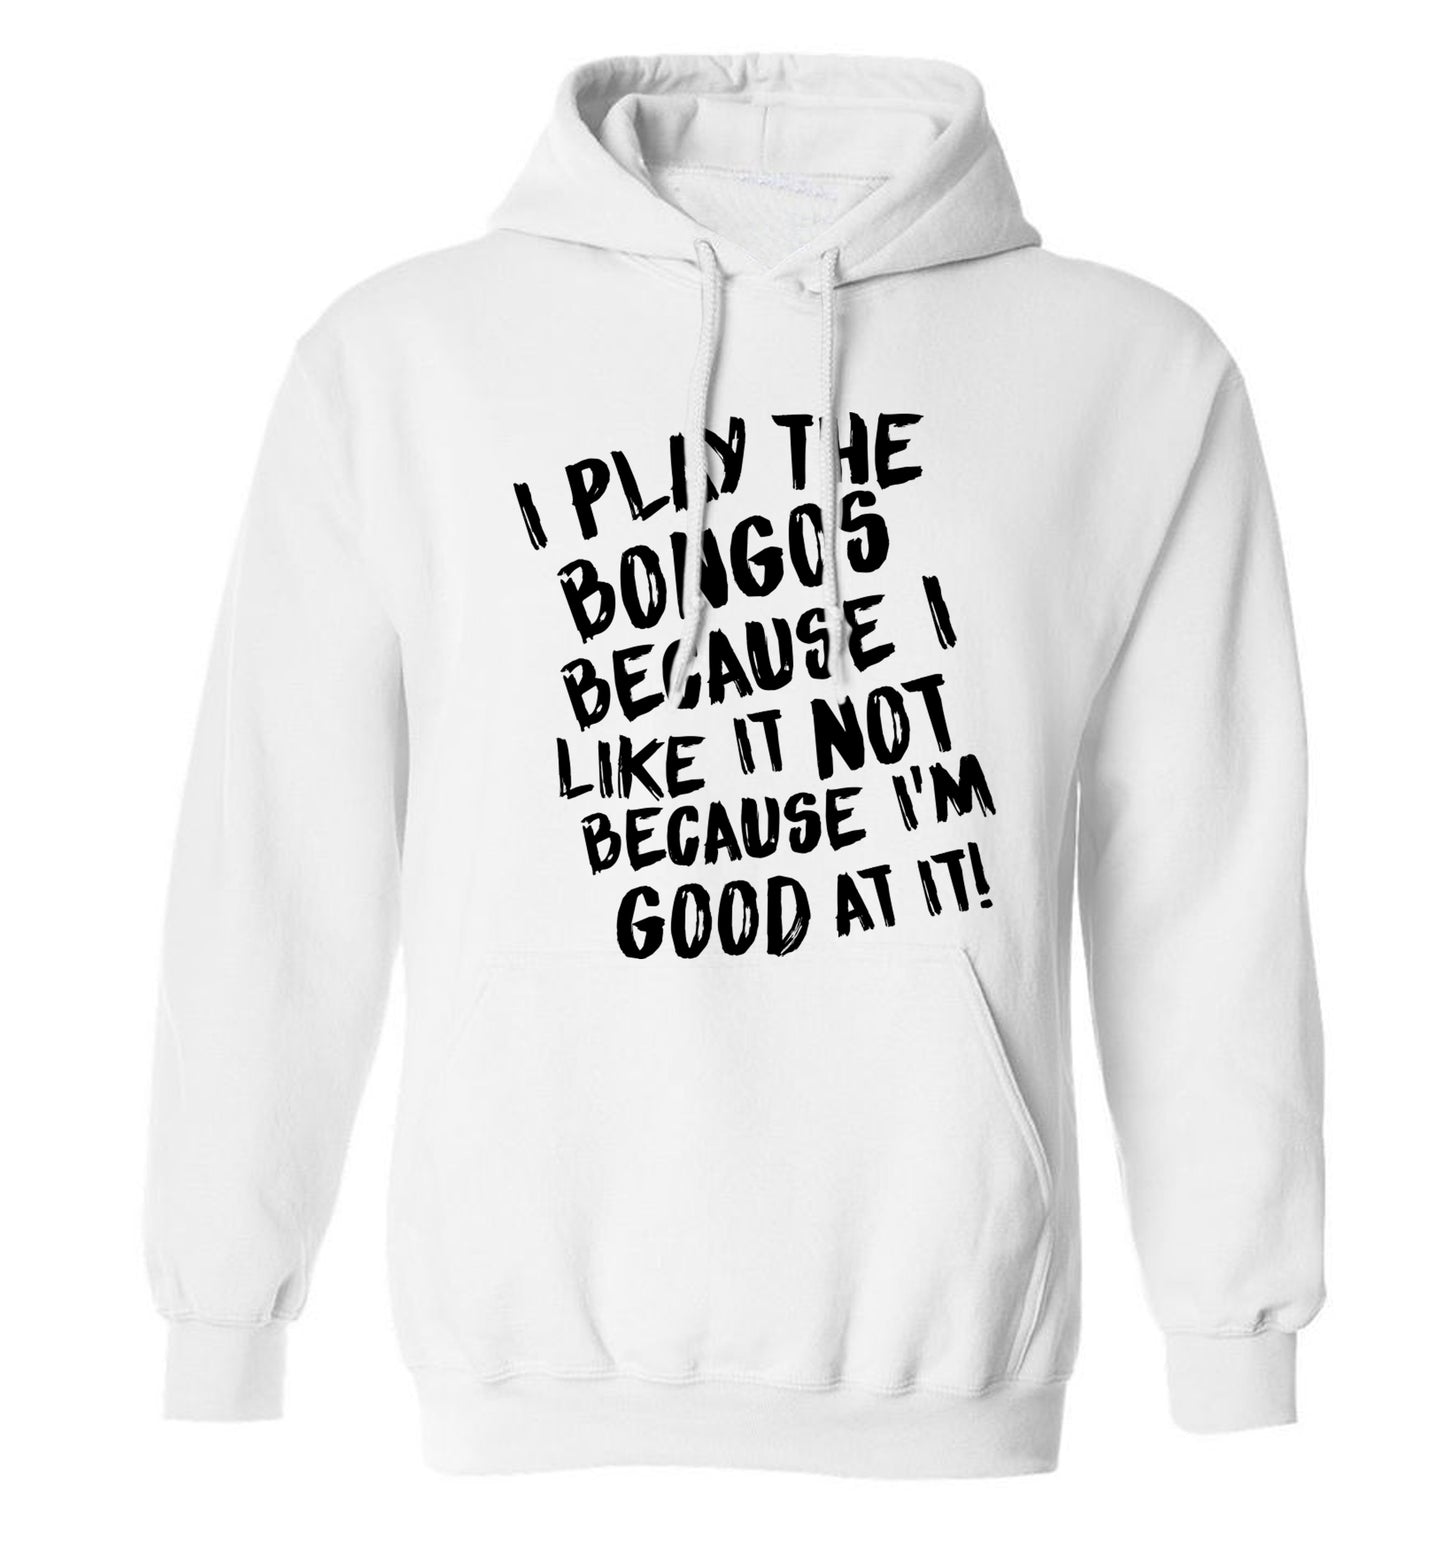 I play the bongos because I like it not because I'm good at it adults unisex white hoodie 2XL